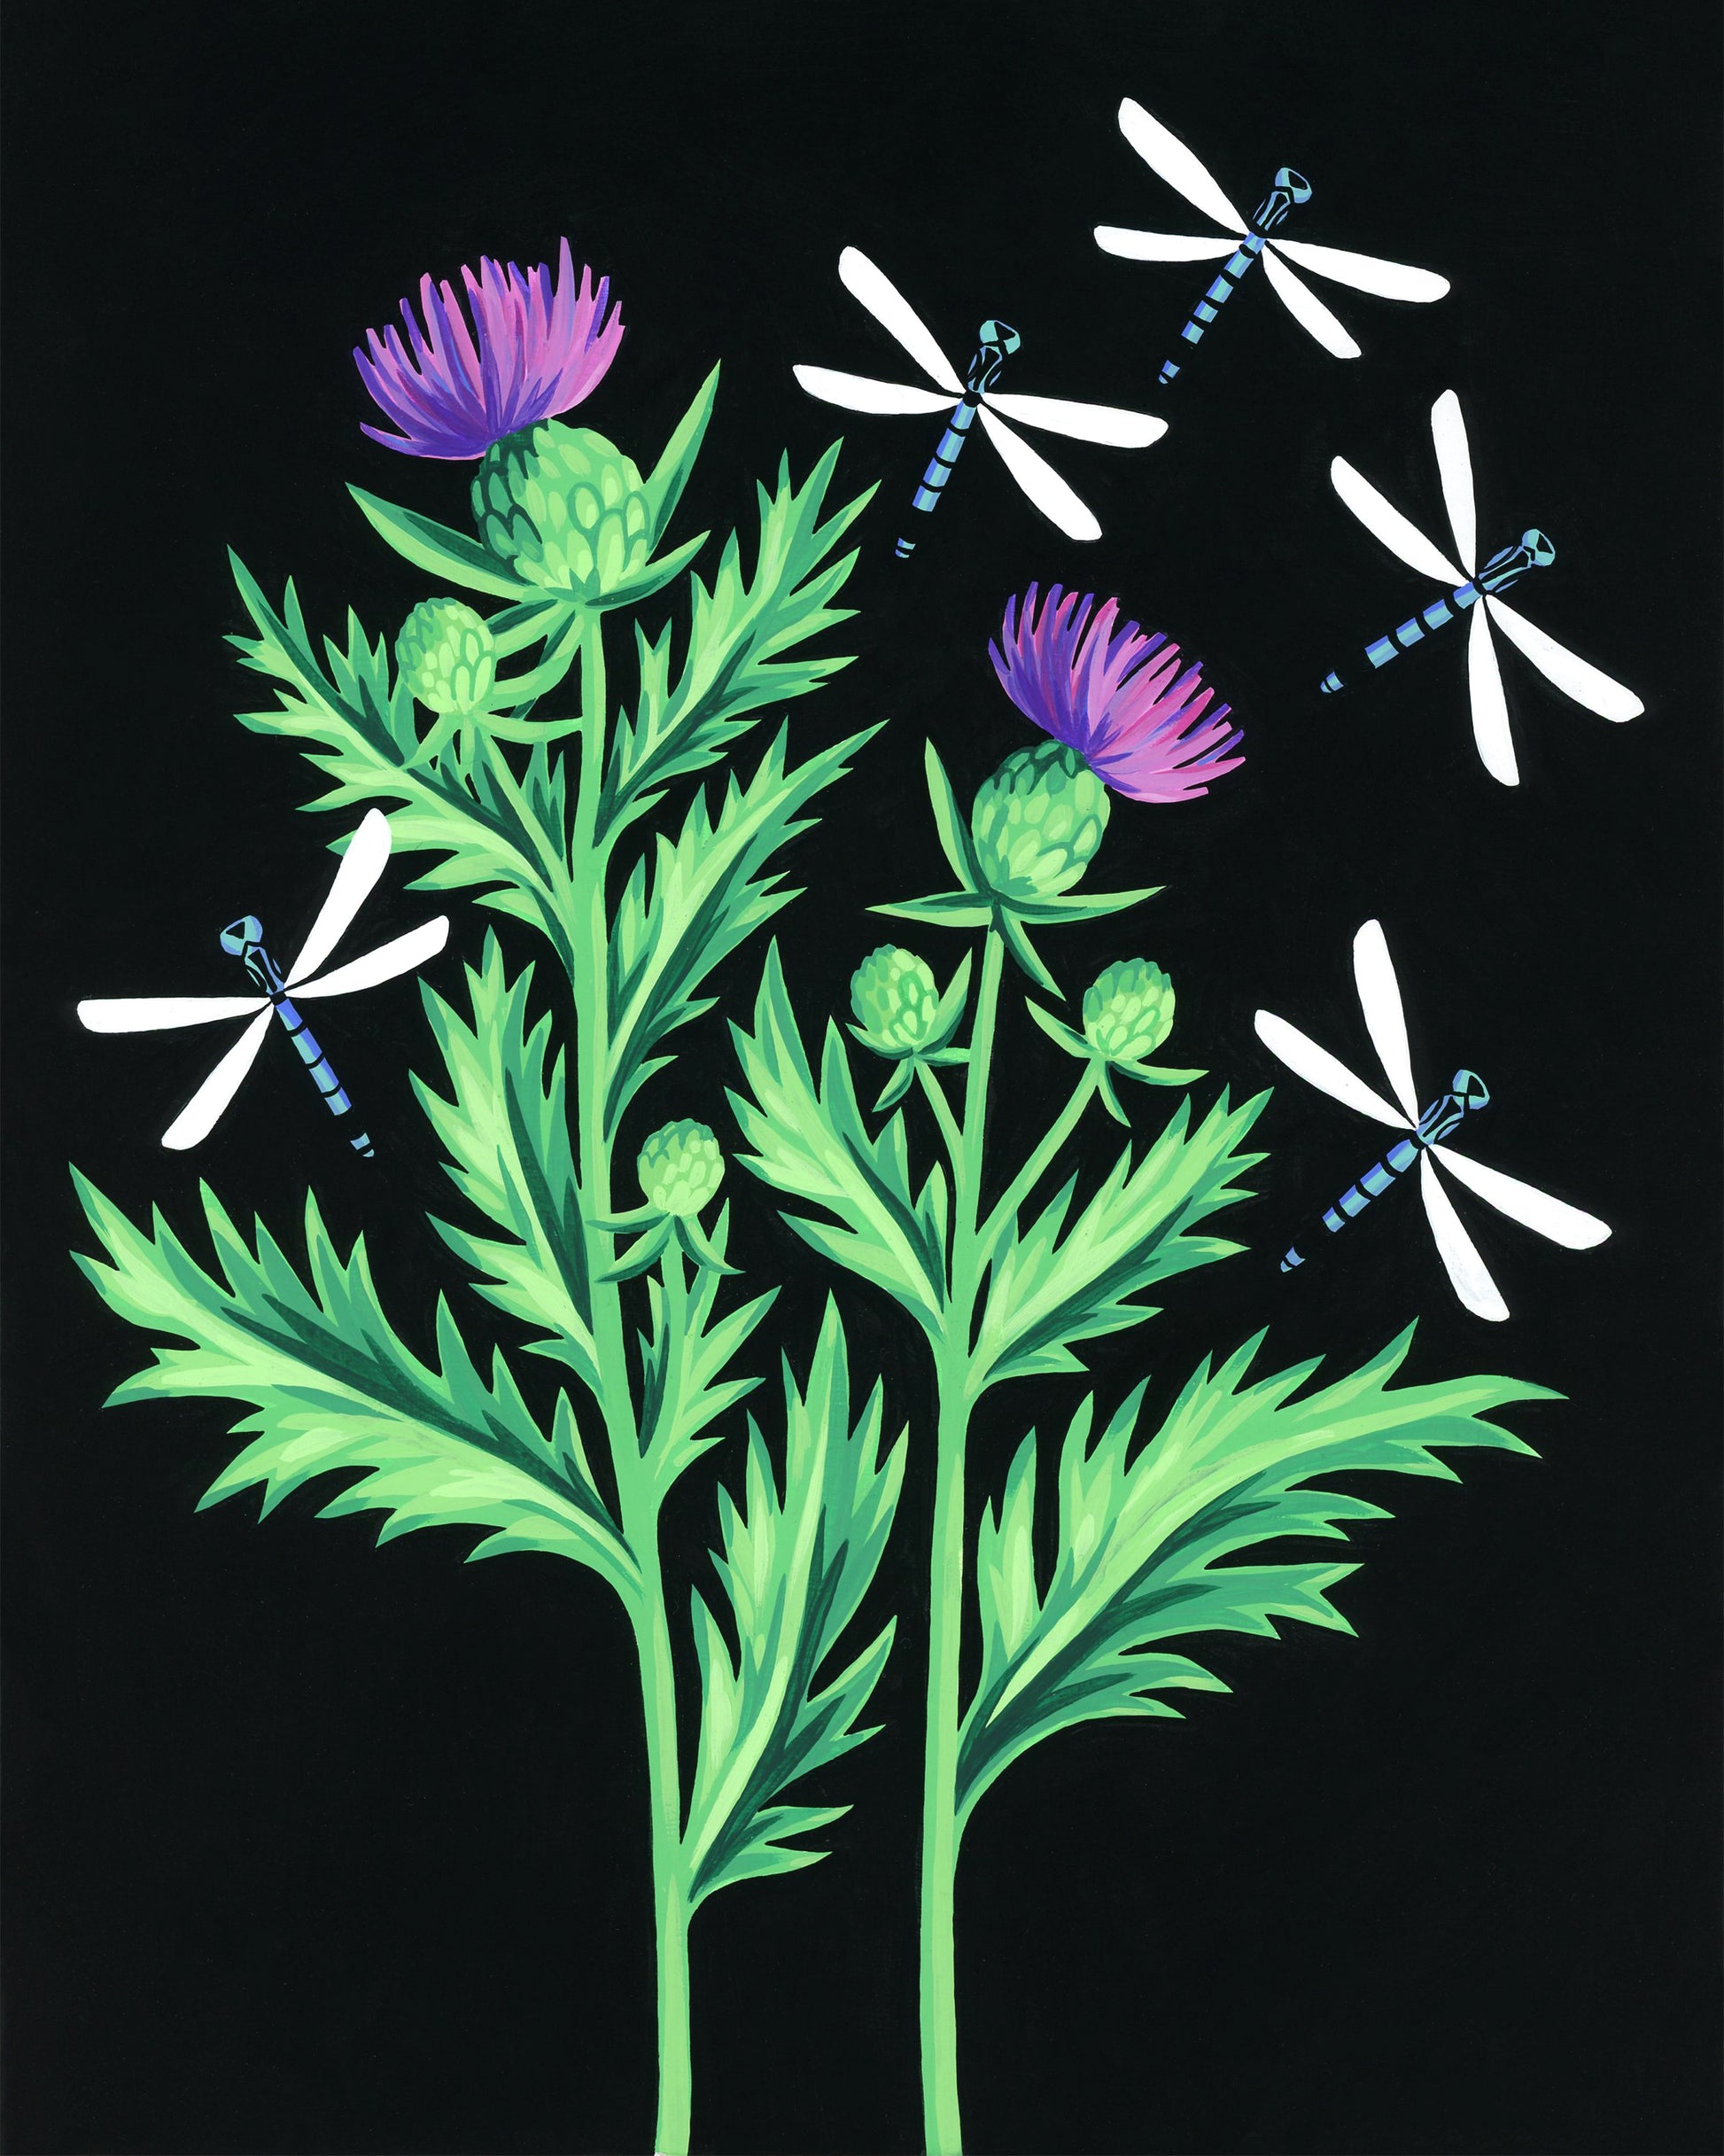 Original painting of thistles and dragonflies